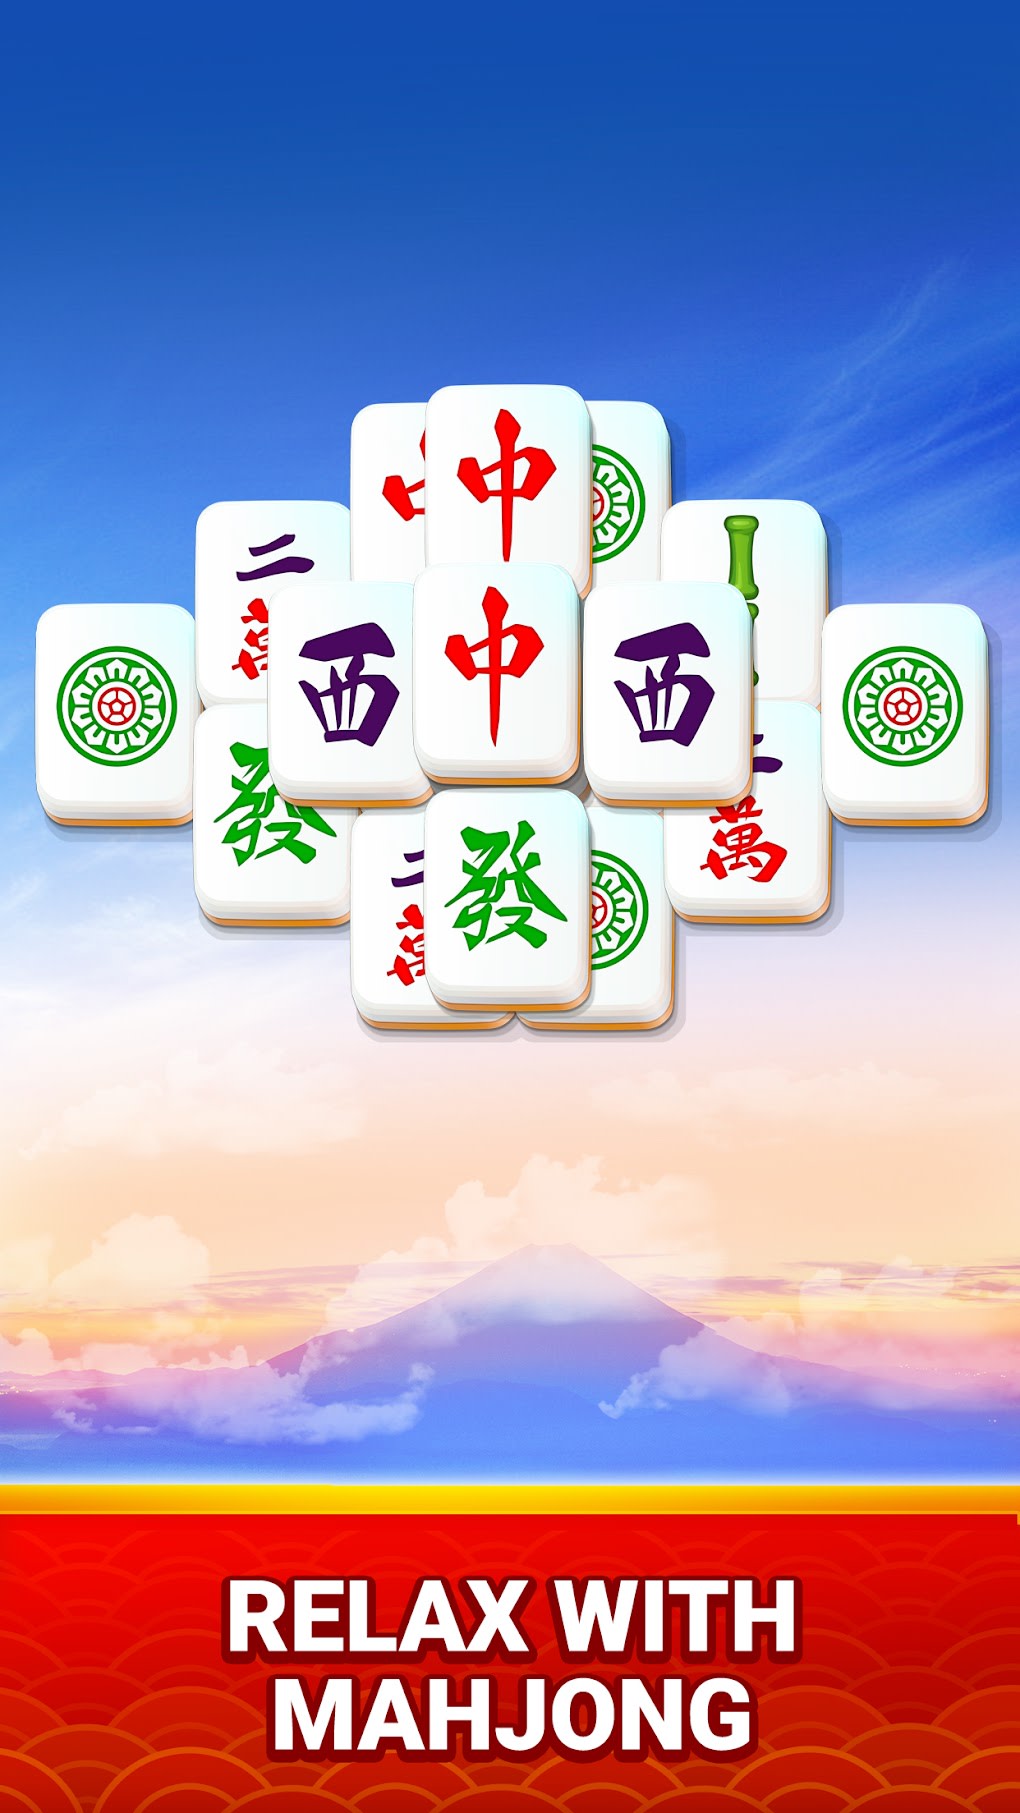 Mahjong Club - Solitaire Game (by GamoVation) IOS Gameplay Video (HD) 